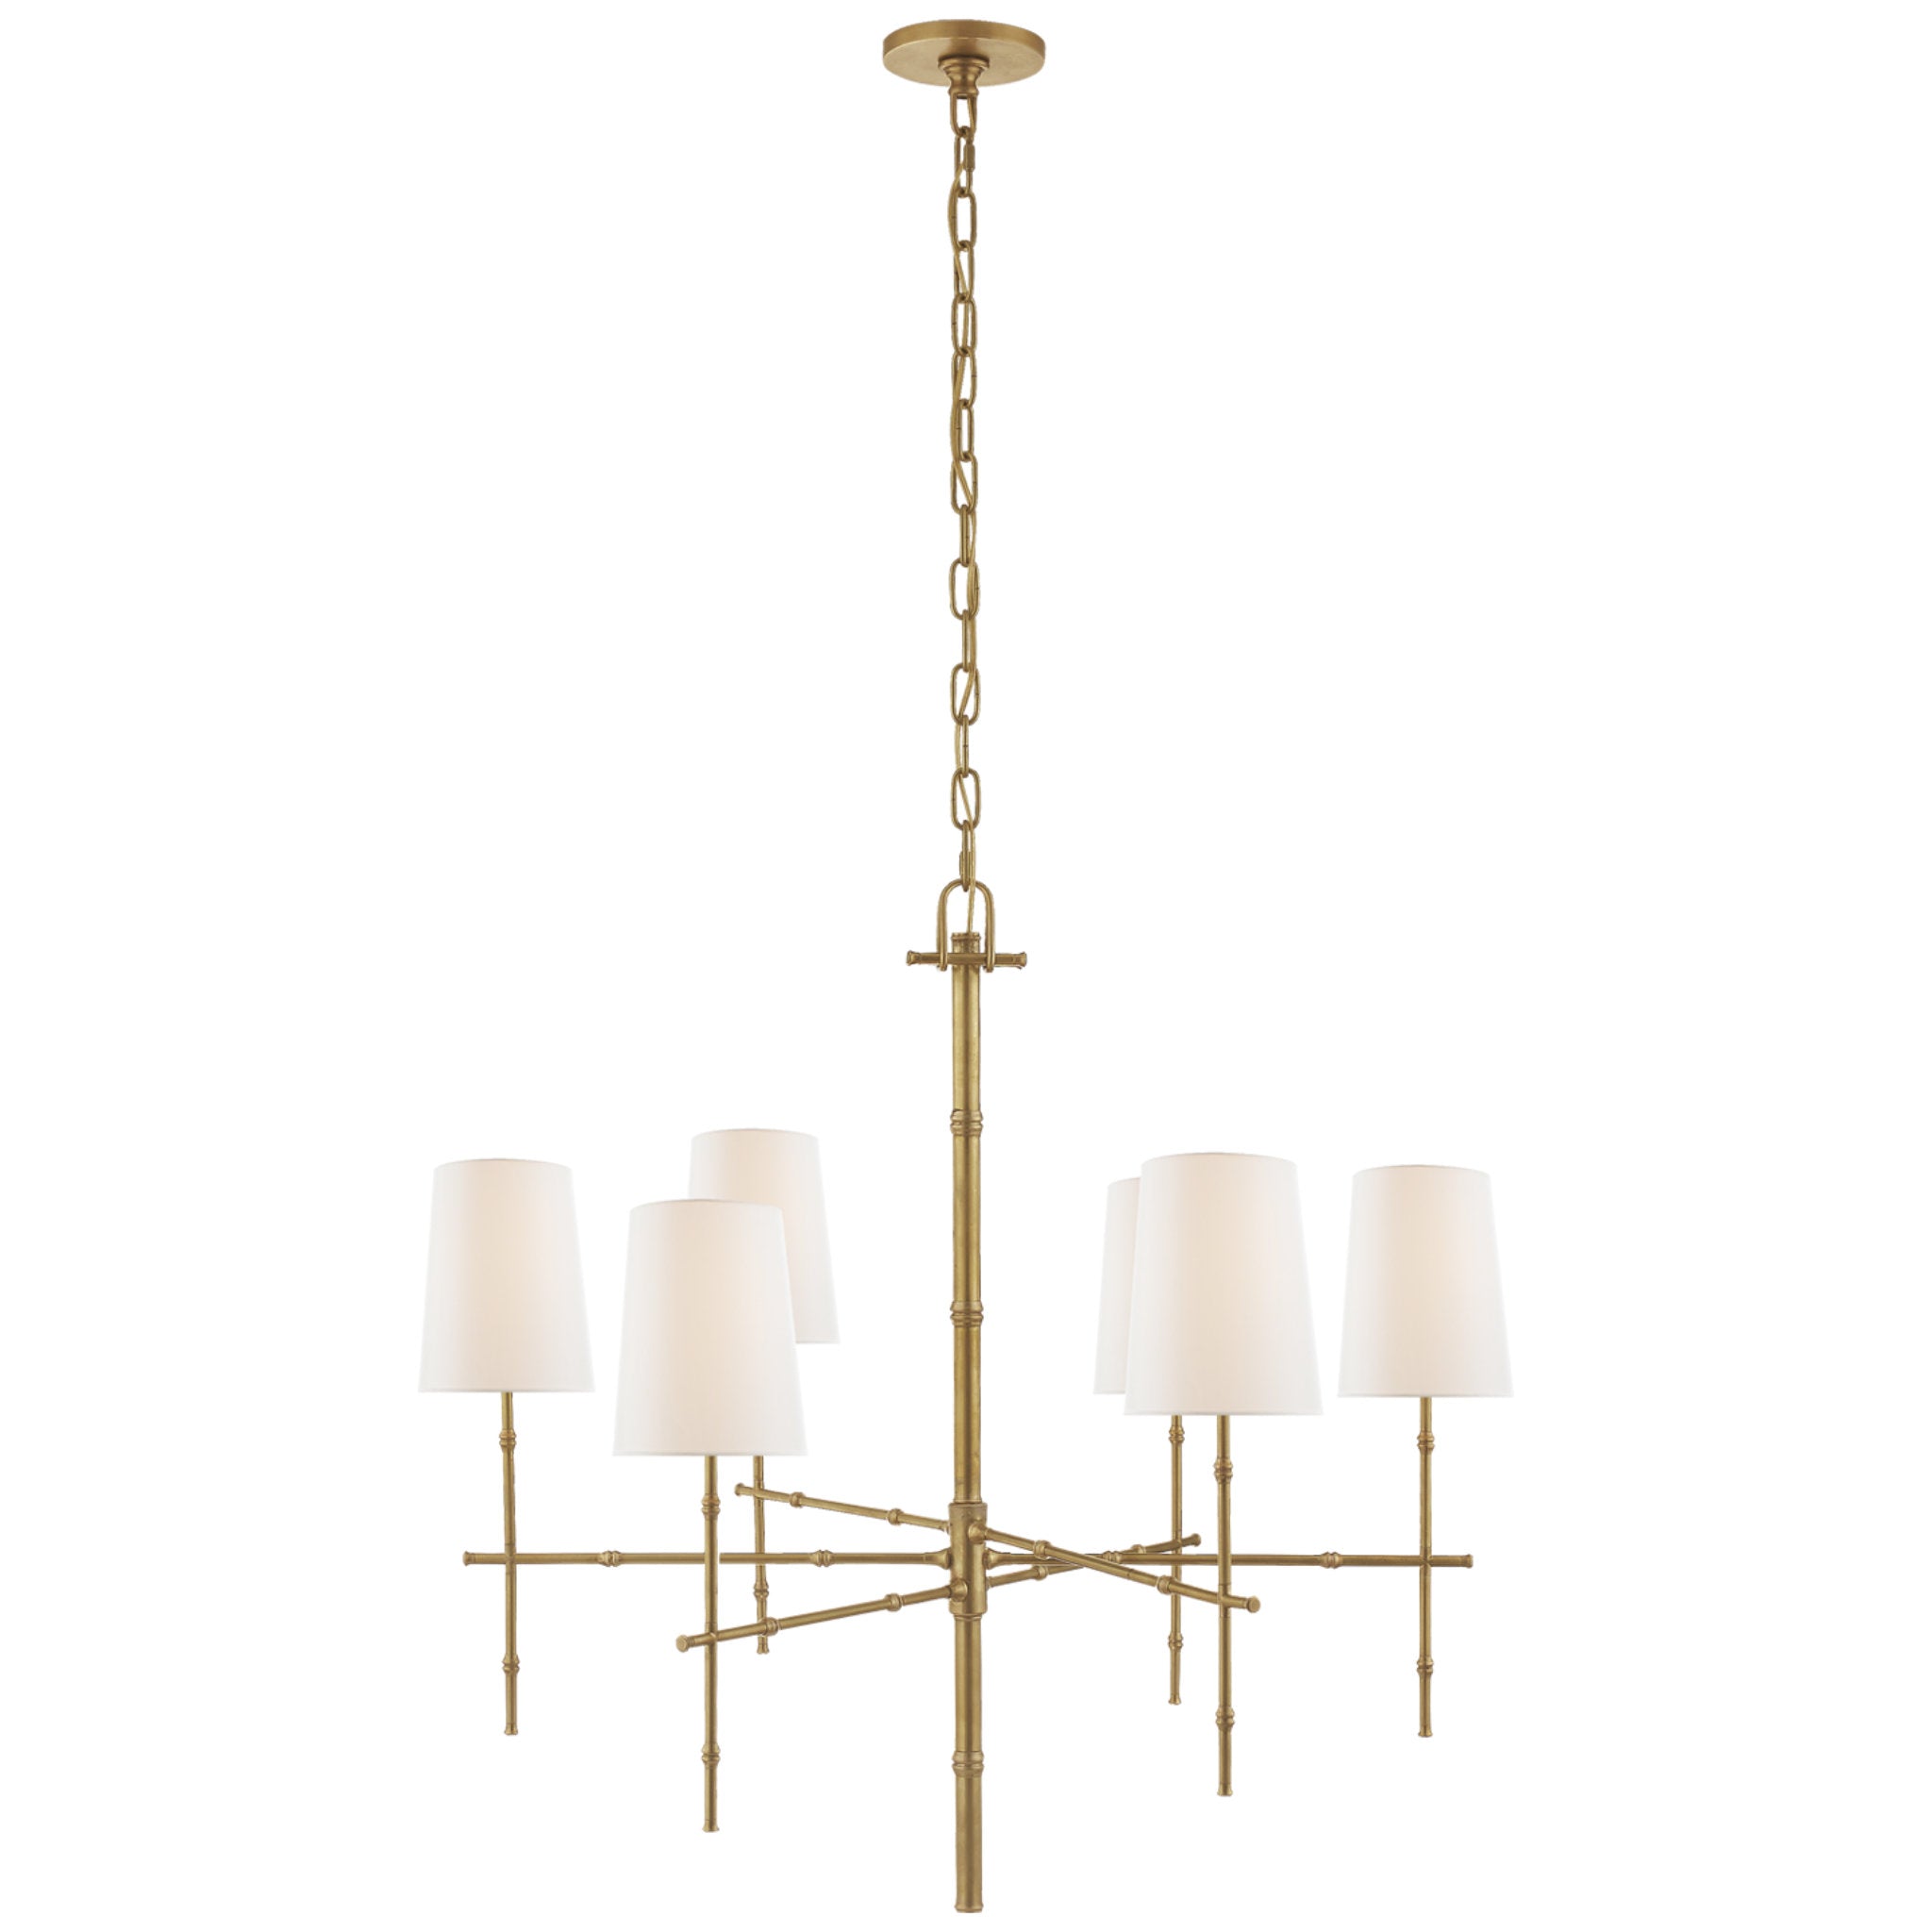 Visual Comfort Grenol Medium Modern Bamboo Chandelier in Hand-Rubbed Antique Brass with Linen Shades